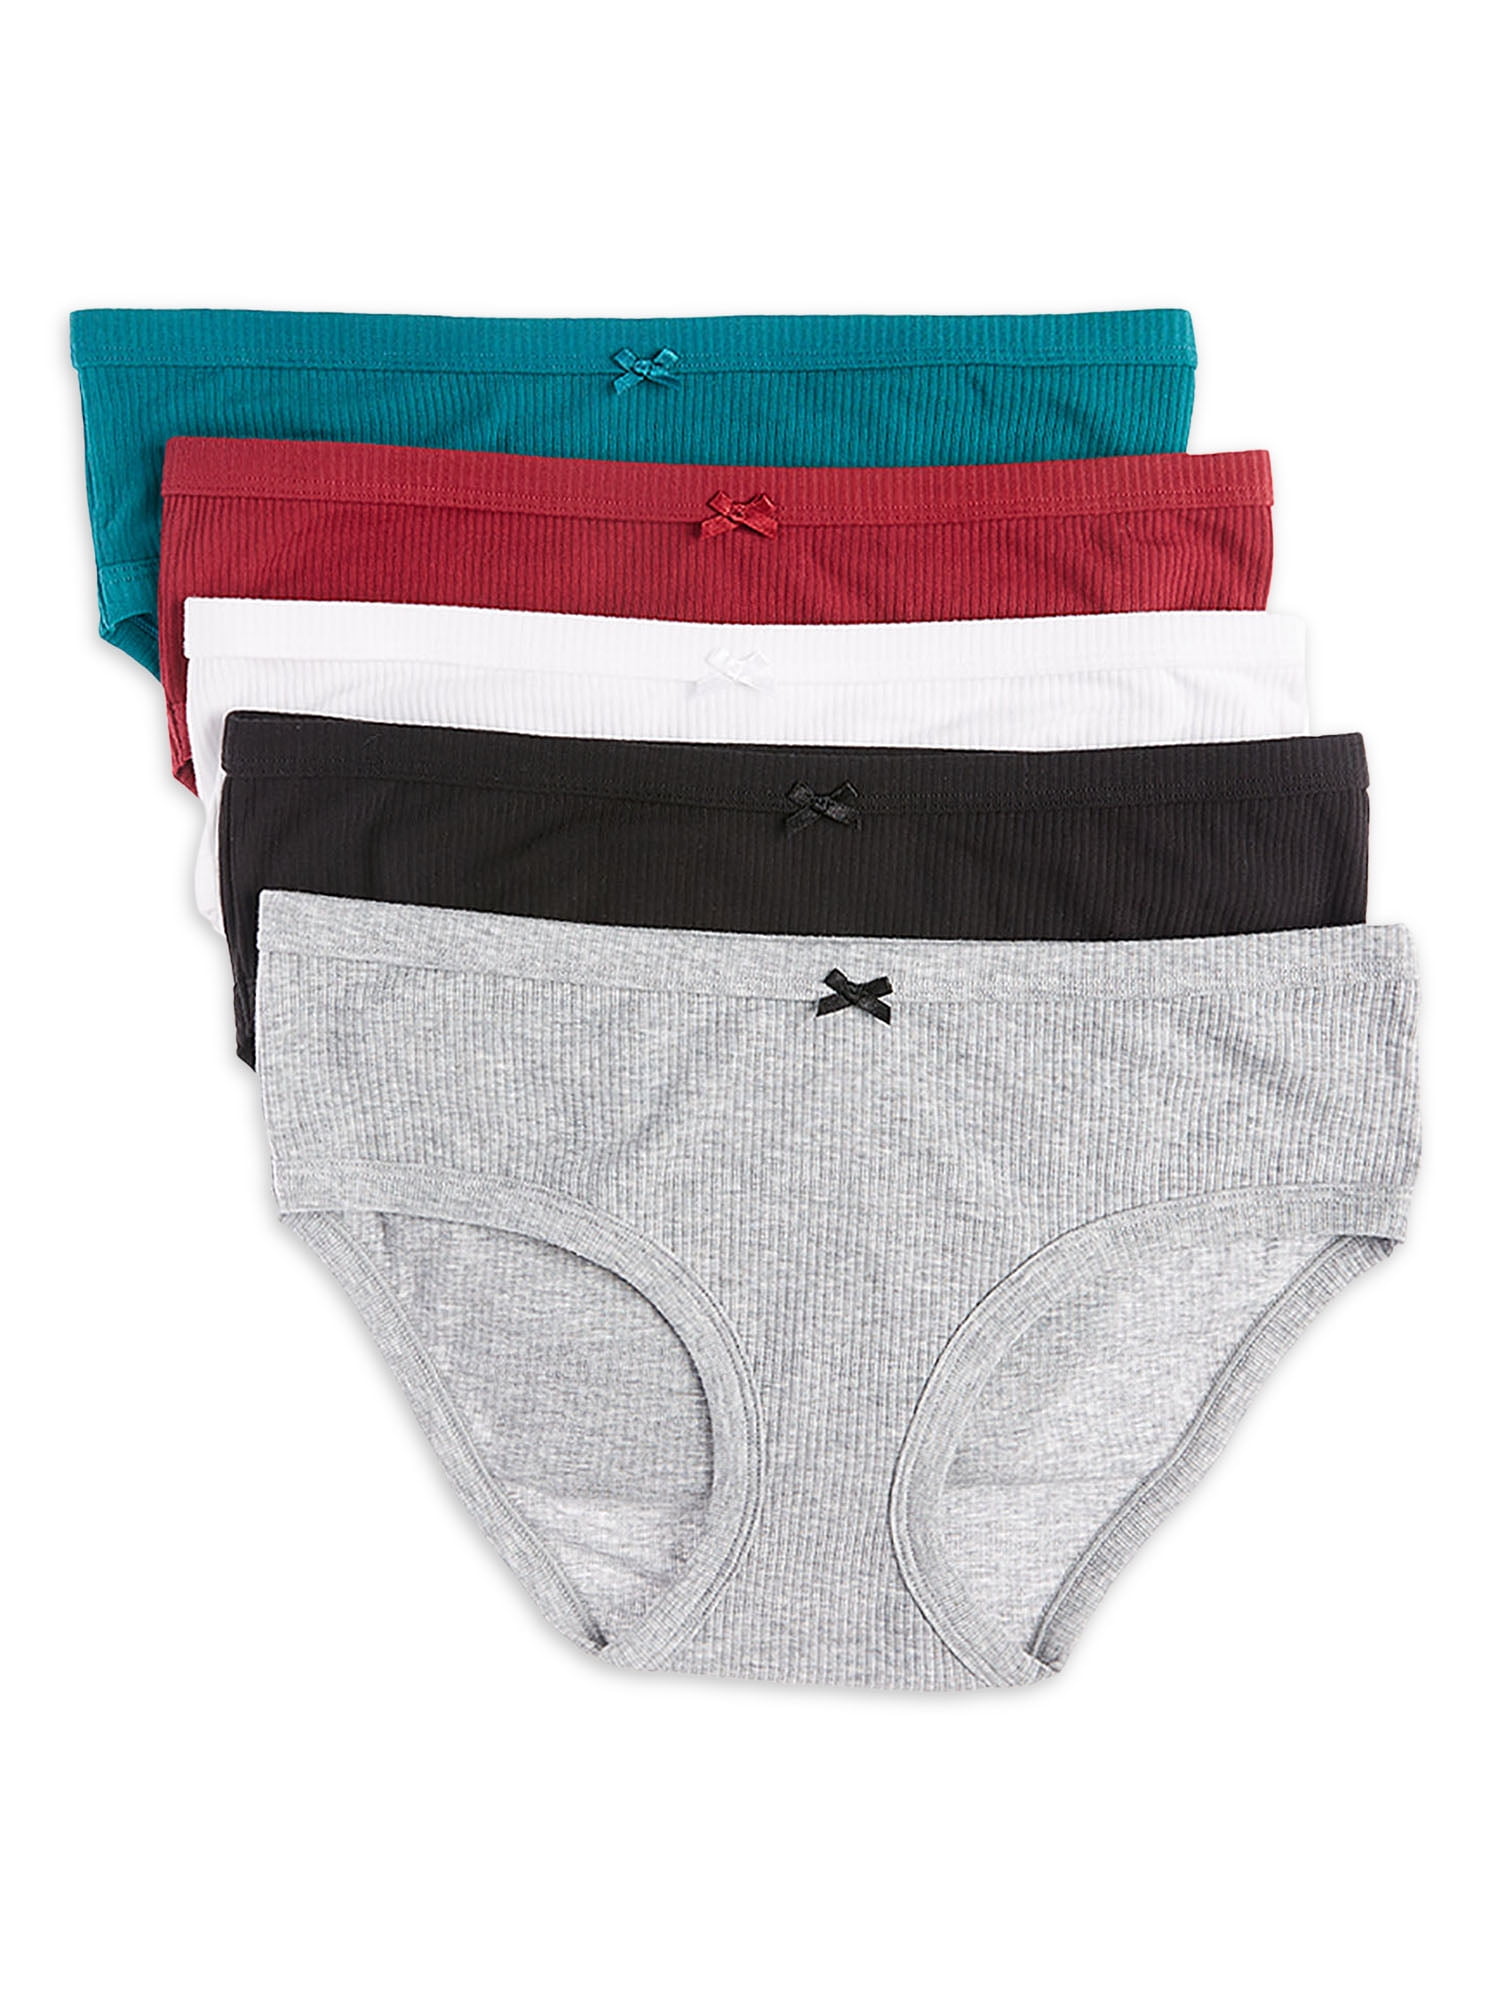 INNERSY Women's Thong Panty Cotton Sporty Thong Underwear 5-Pack (L, Vivid)  